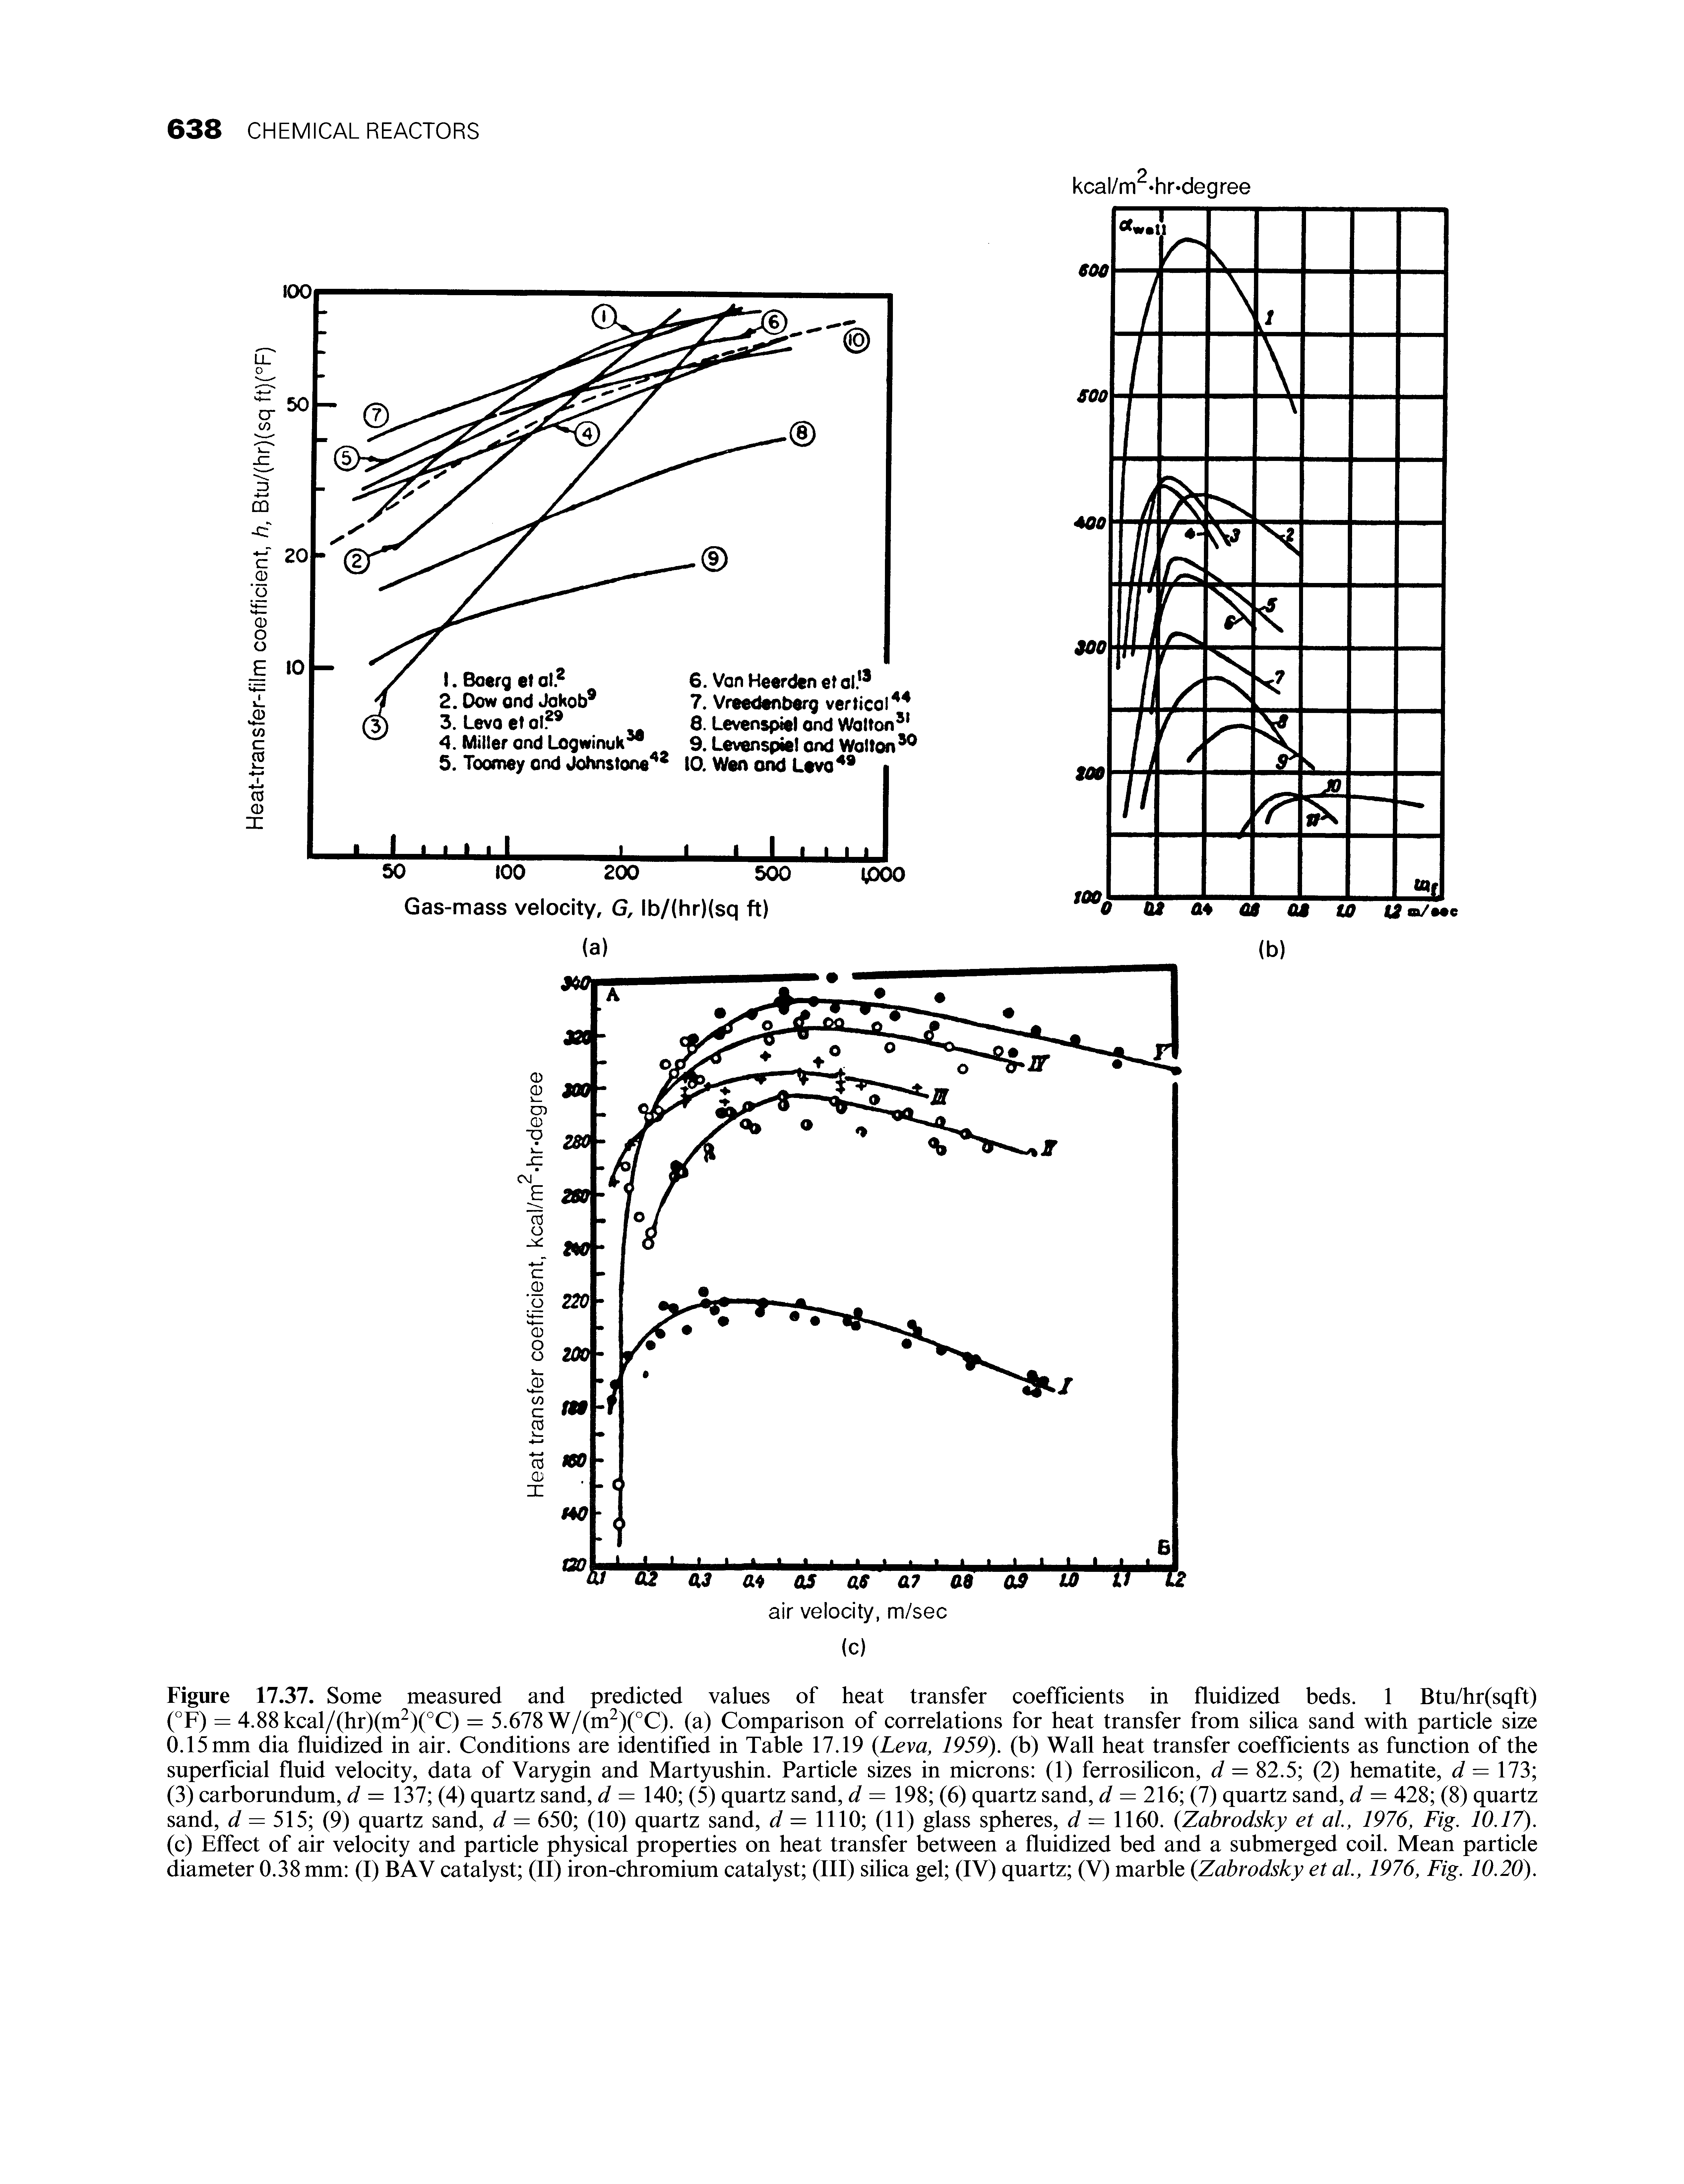 Figure 17.37. Some measured and predicted values of heat transfer coefficients in fluidized beds. 1 Btu/hr(sqft) (°F) = 4.88kcal/(hr)(m )(°C) = 5.678 W/(m )(°C). (a) Comparison of correlations for heat transfer from silica sand with particle size 0.15 mm dia fluidized in air. Conditions are identified in Table 17.19 (Leva, 1959). (b) Wall heat transfer coefficients as function of the superficial fluid velocity, data of Varygin and Martyushin. Particle sizes in microns (1) ferrosilicon, d = 82.5 (2) hematite, d = 173 (3) carborundum, d = 137 (4) quartz sand, d = 140 (5) quartz sand, d = 198 (6) quartz sand, d = 216 (7) quartz sand, d = 428 (8) quartz sand, d = 5 5 (9) quartz sand, d = 650 (10) quartz sand, d = lllO (11) glass spheres, d = 1160. (Zabrodsky et al, 1976, Fig. 10.17). (c) Effect of air velocity and particle physical properties on heat transfer between a fluidized bed and a submerged coil. Mean particle diameter 0.38 mm (I) BAV catalyst (II) iron-chromium catalyst (III) silica gel (IV) quartz (V) marble (Zabrodsky et al., 1976, Fig. 10.20).